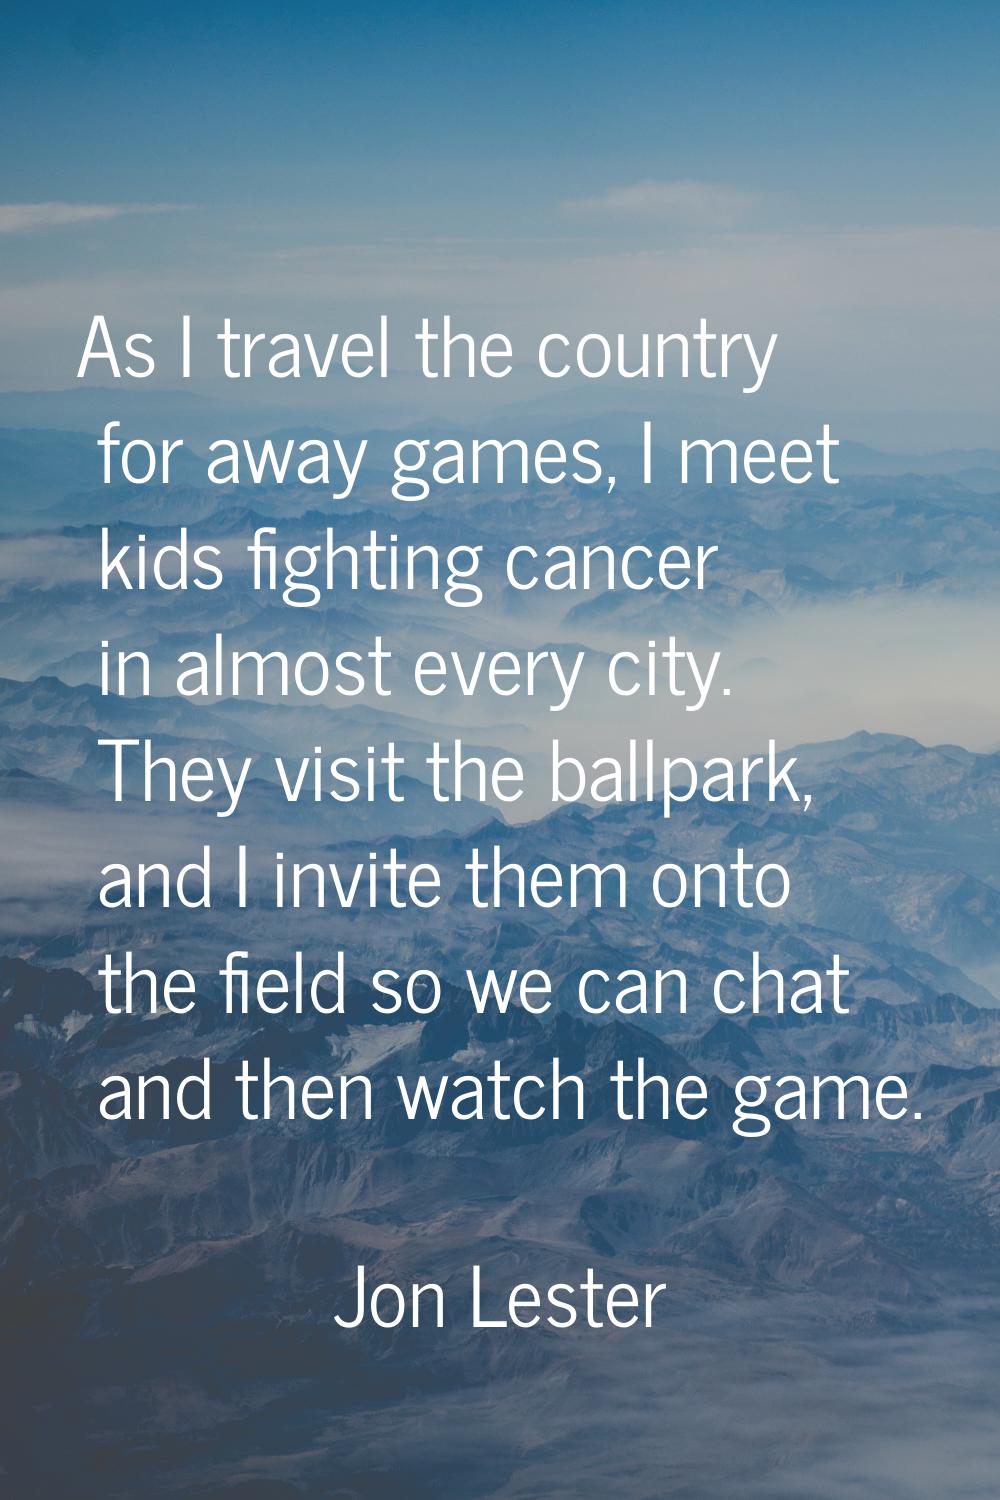 As I travel the country for away games, I meet kids fighting cancer in almost every city. They visi